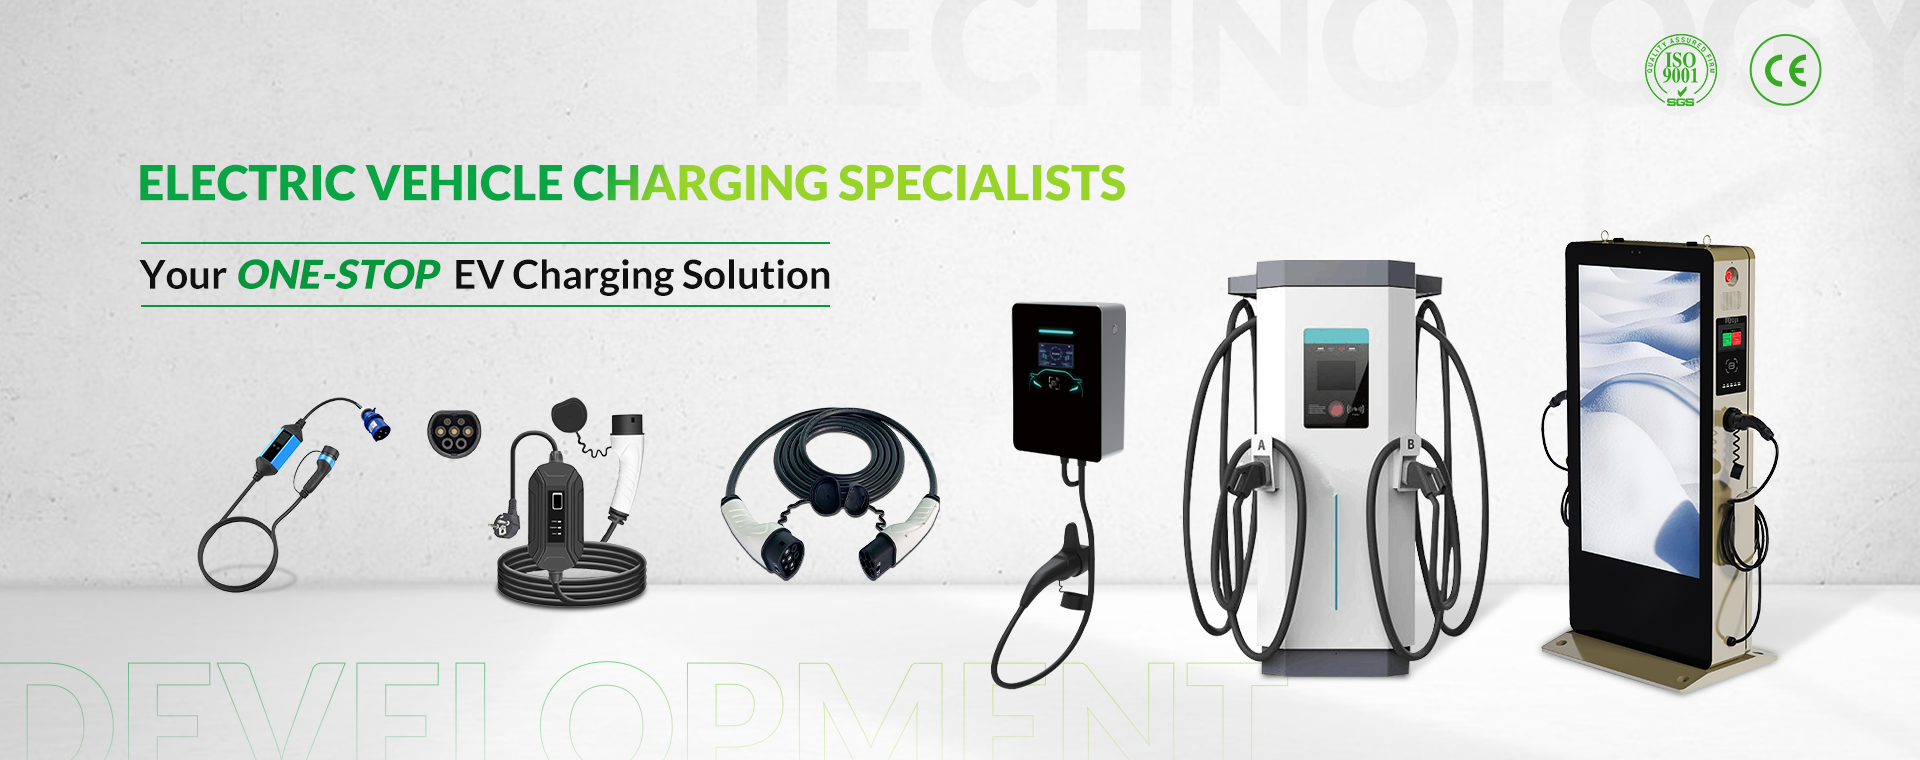 ELECTRIC VEHICLE CHARGING SPECIALISTs